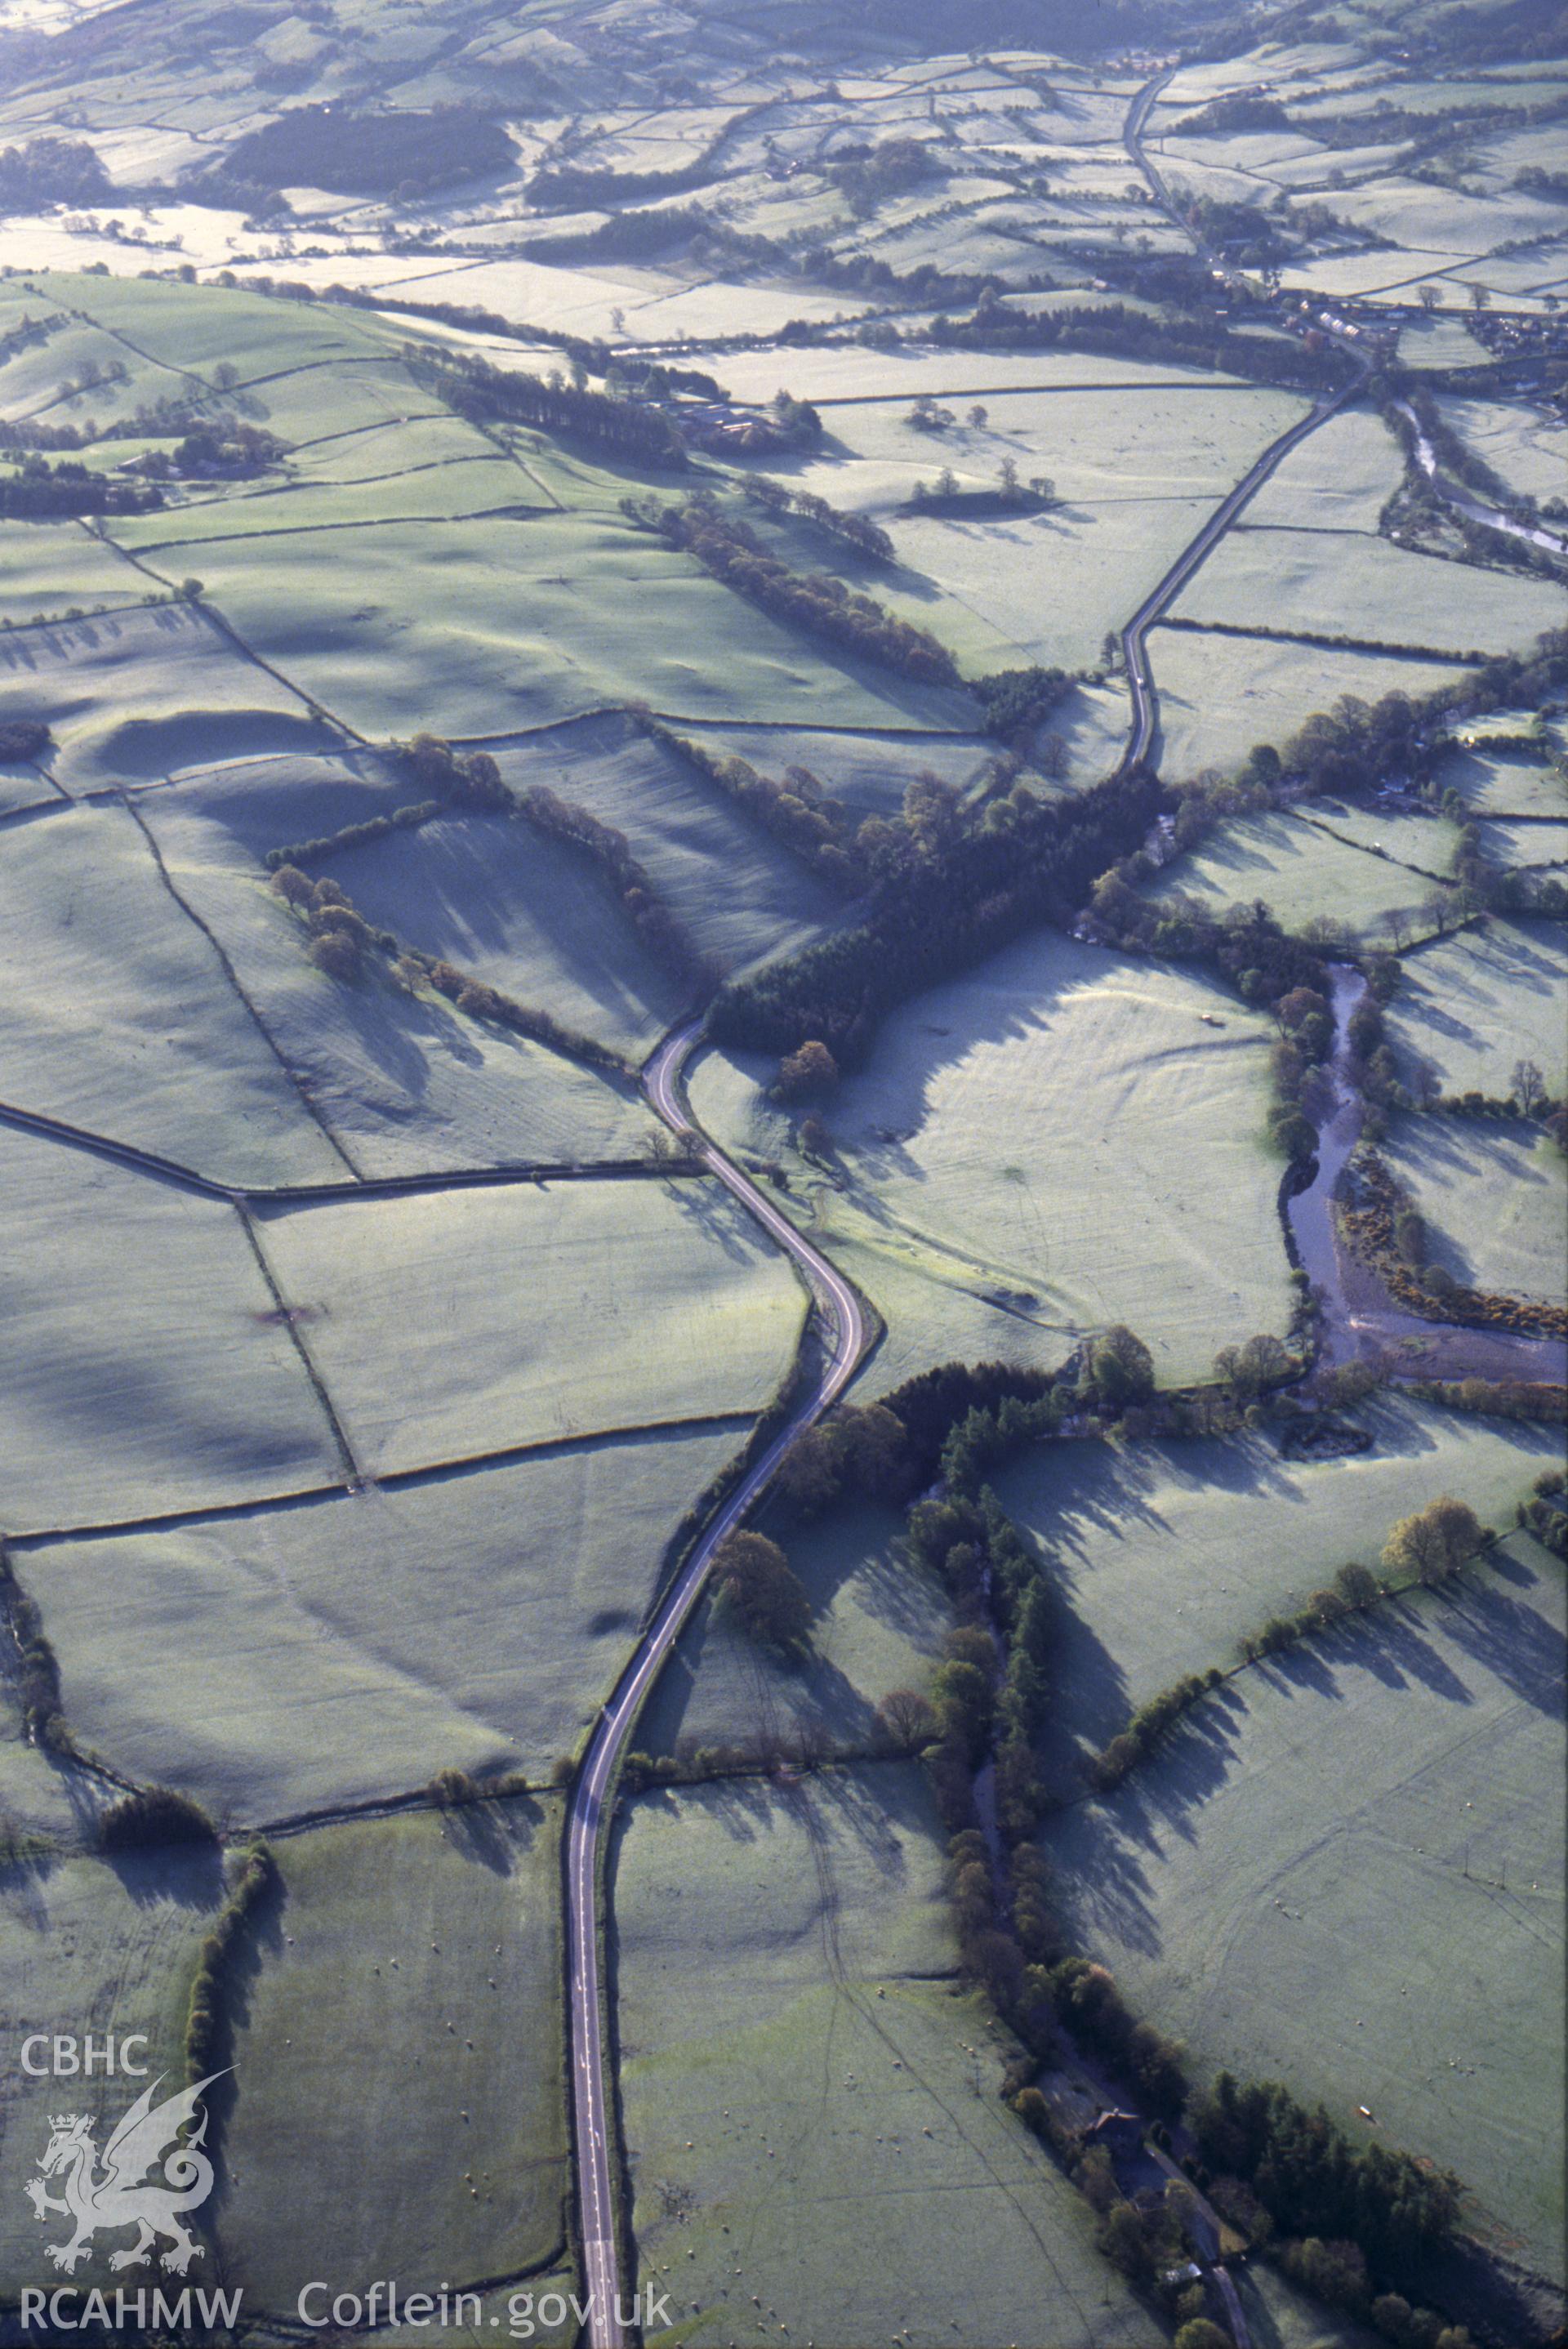 Slide of RCAHMW colour oblique aerial photograph of the area around Coed Bach to the south-east of Llangadfan, taken by C.R. Musson, 1993.